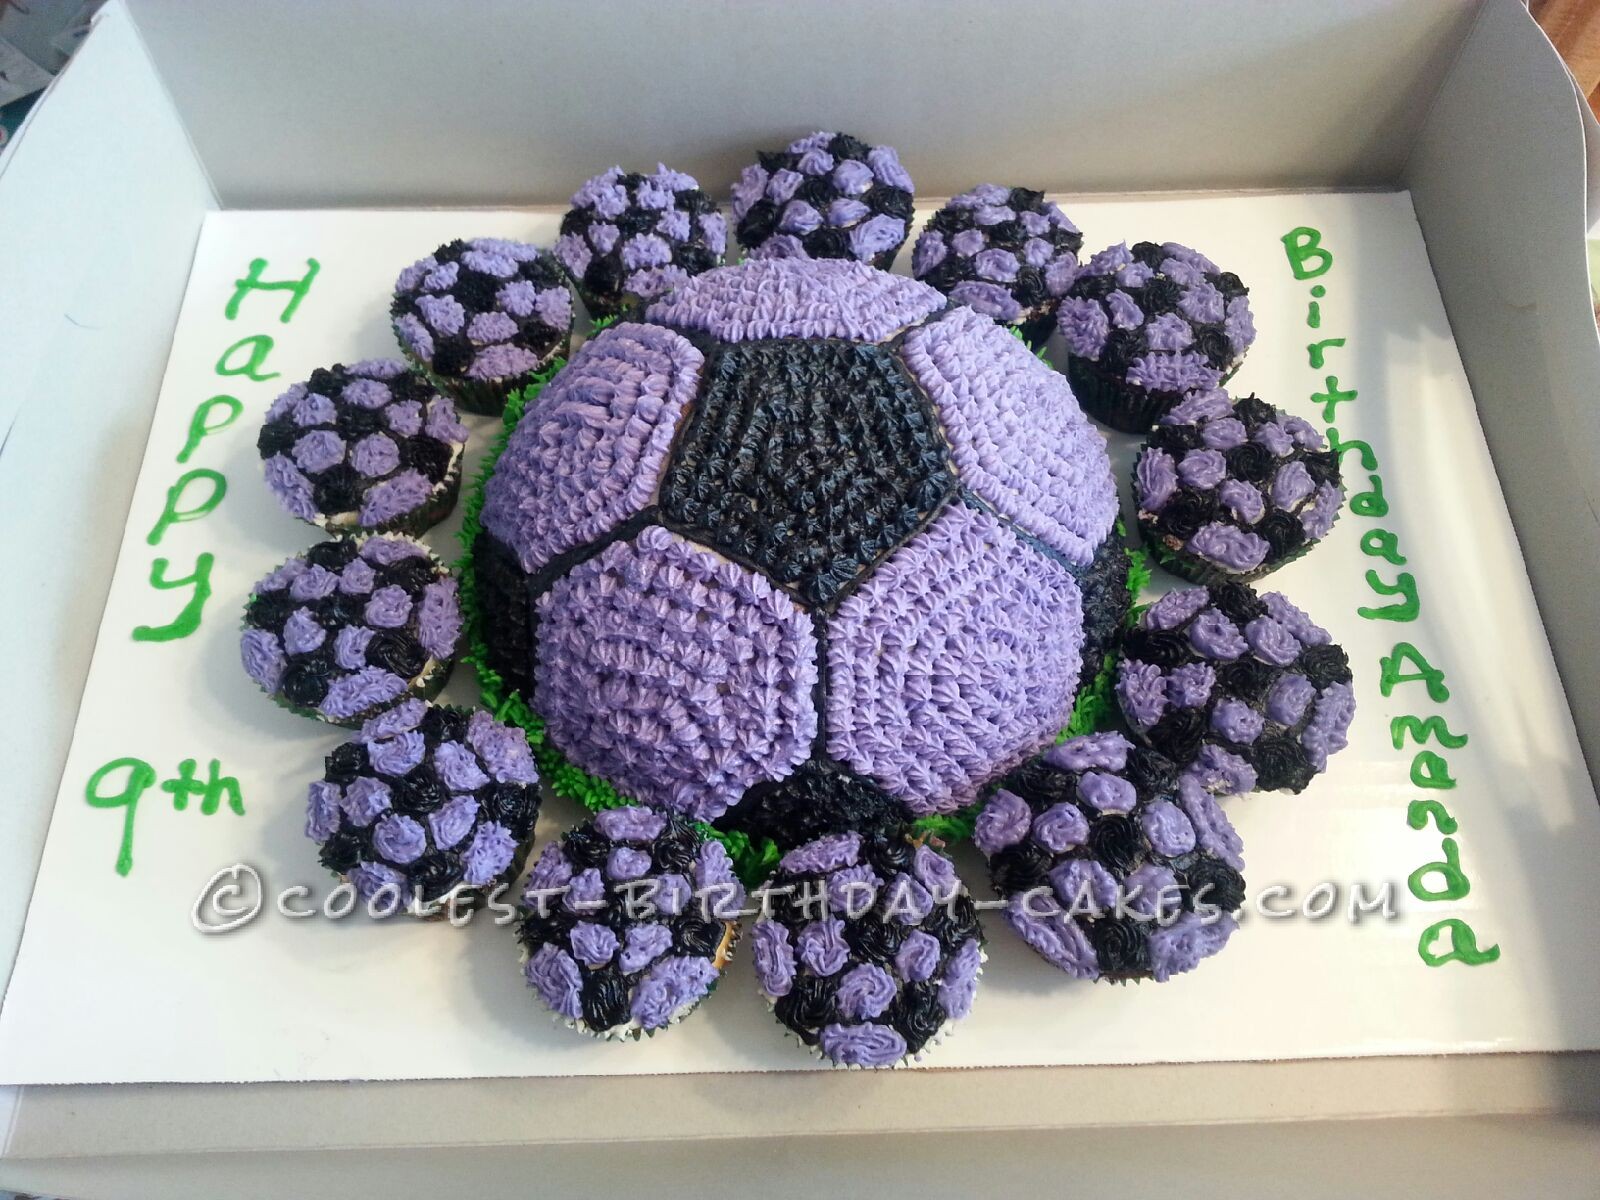 Coolest Soccer Ball Cake and Cupcakes